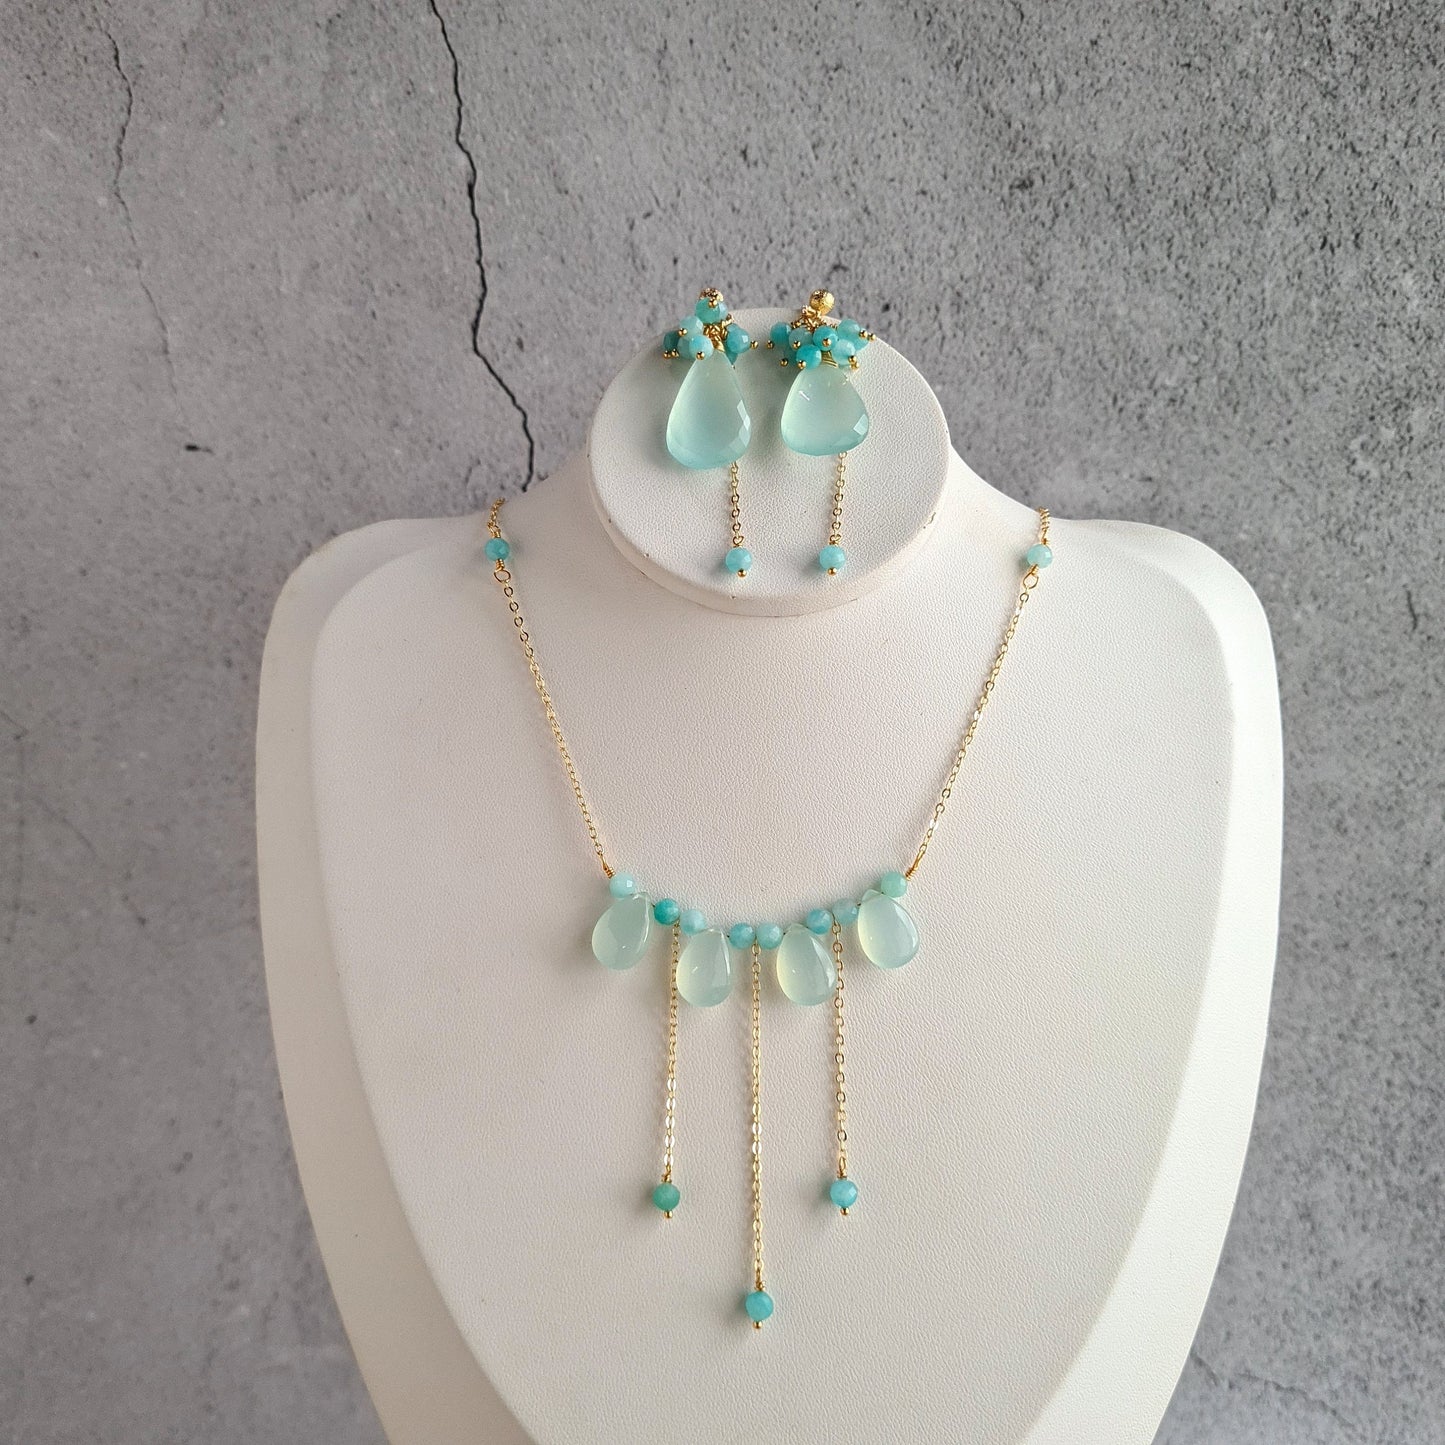 Aqua Blue Chalcedony Cluster Gemstone with Amazonite Earrings & Necklace Set